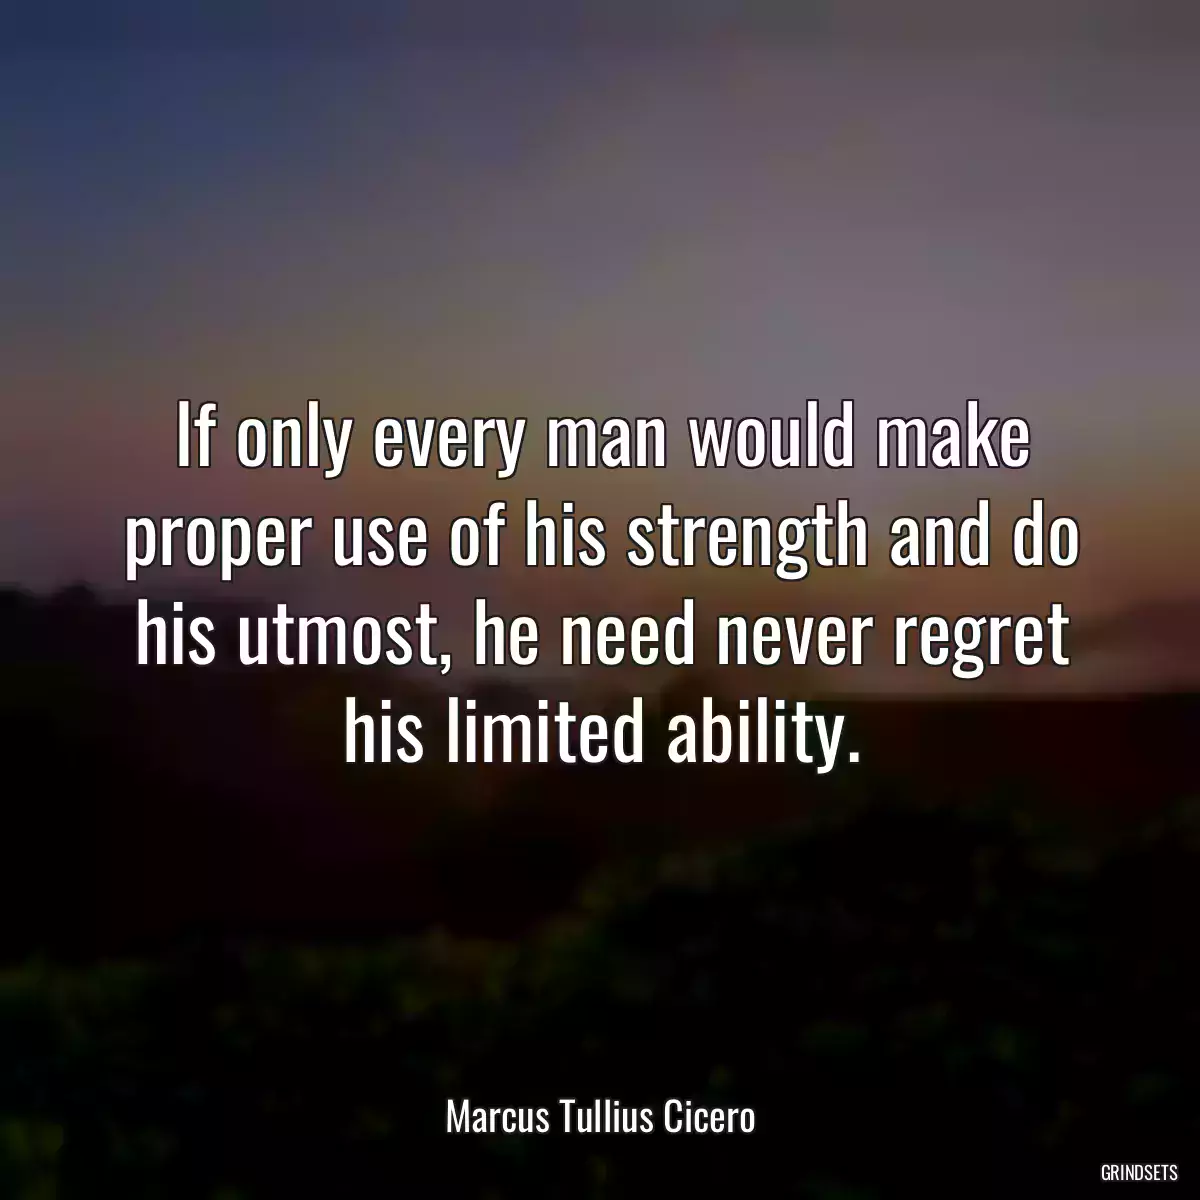 If only every man would make proper use of his strength and do his utmost, he need never regret his limited ability.